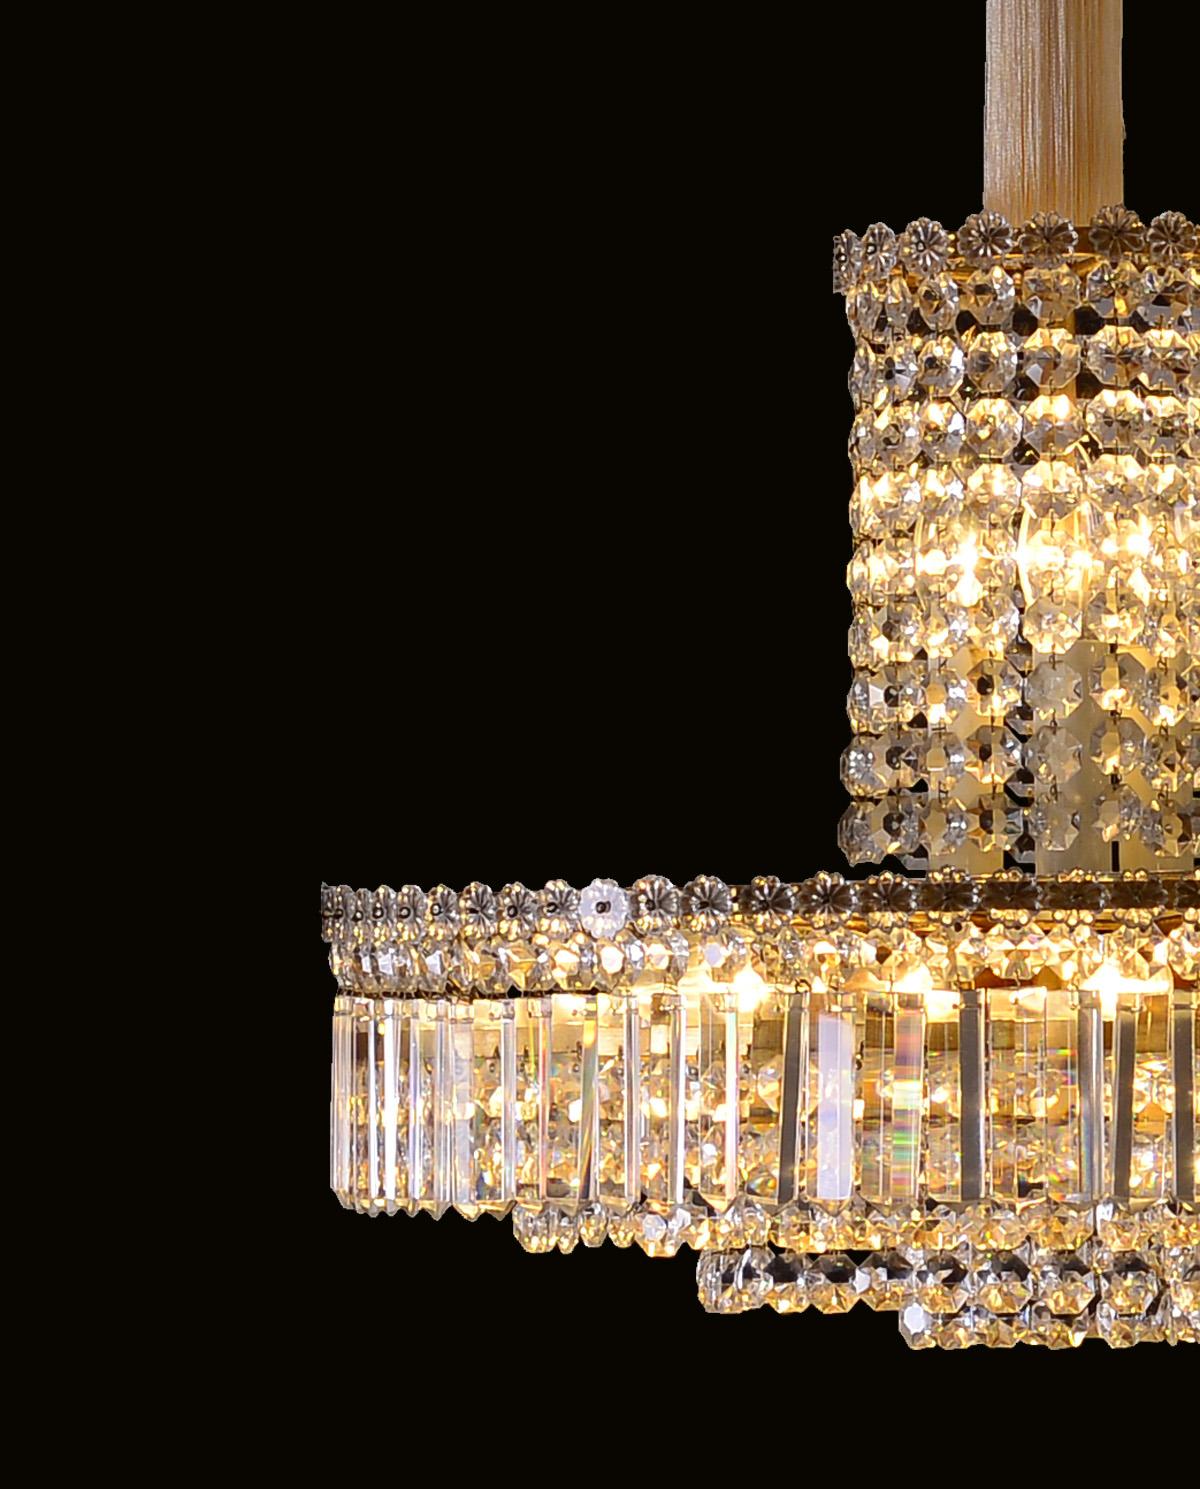 An unusual ten flames parlor chandelier with excellent glass-hangings. The indicated height is just the chandelier itself.